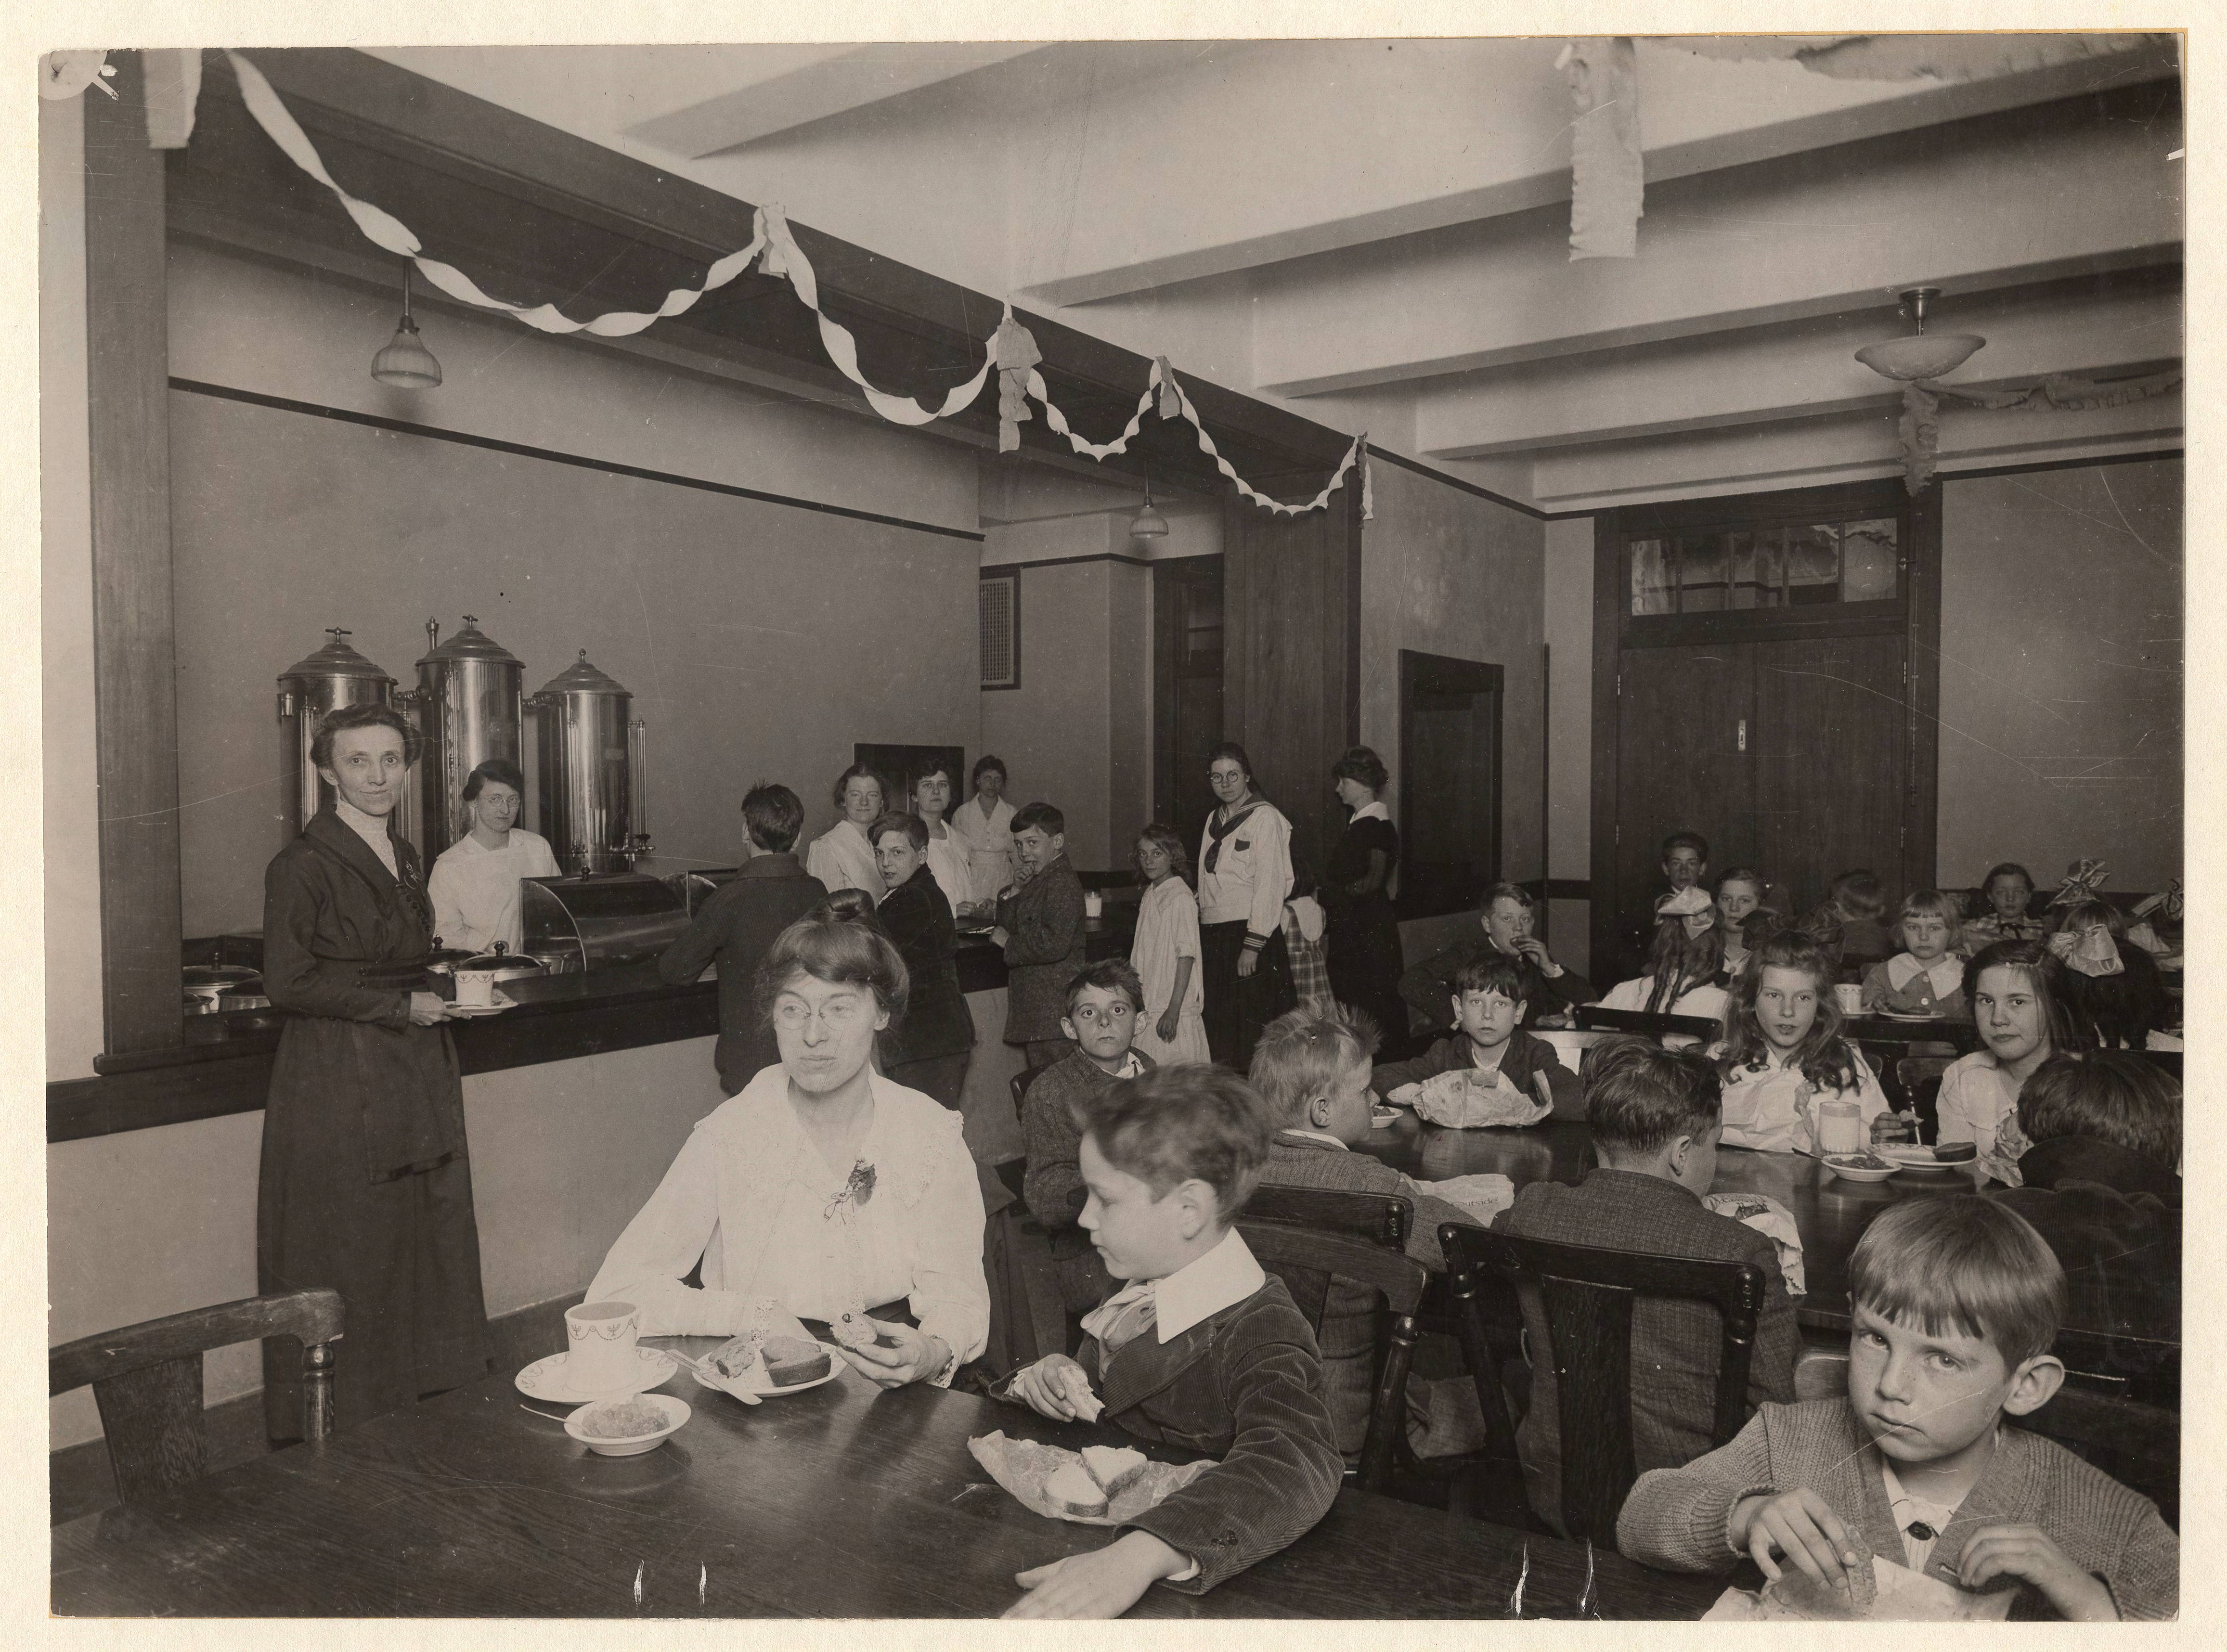 The cafeteria in Stephens Hall.